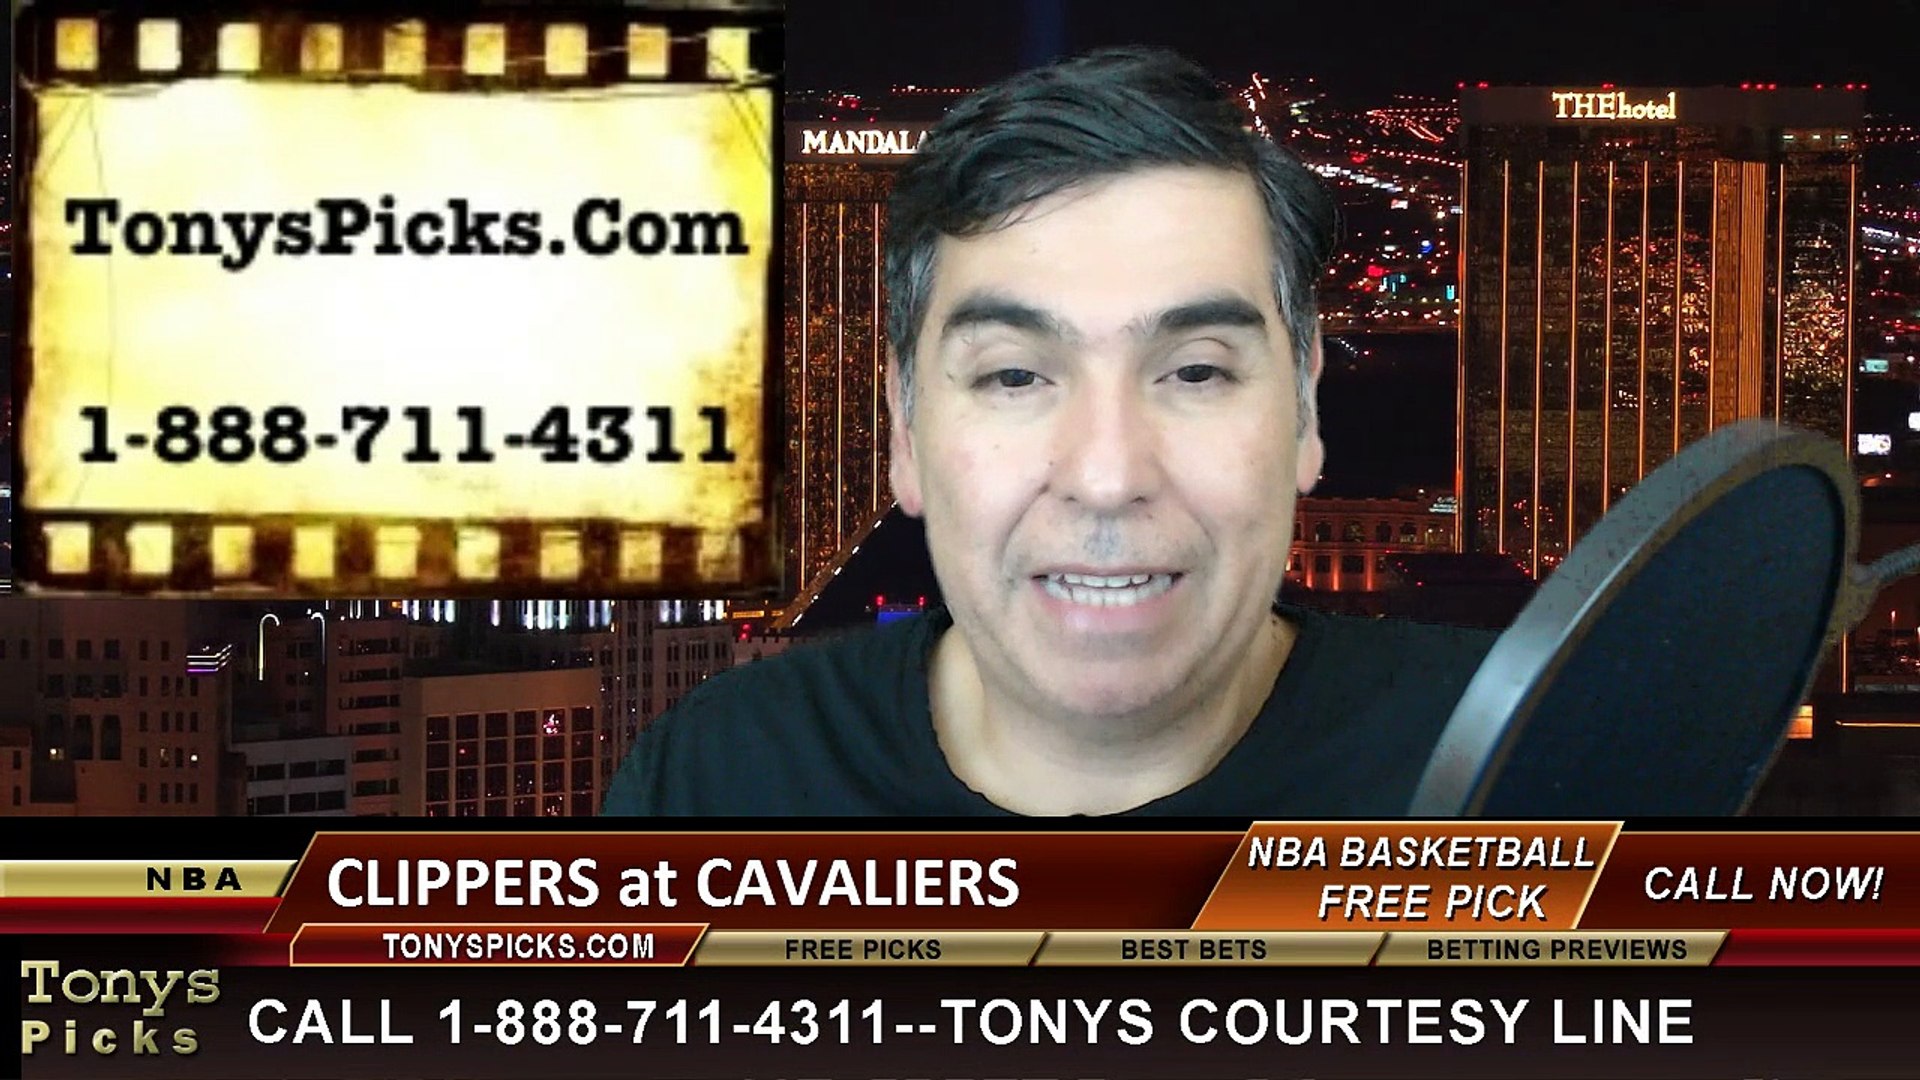 Cleveland Cavaliers vs. LA Clippers Free Pick Prediction NBA Pro Basketball Odds Preview 2-5-2015